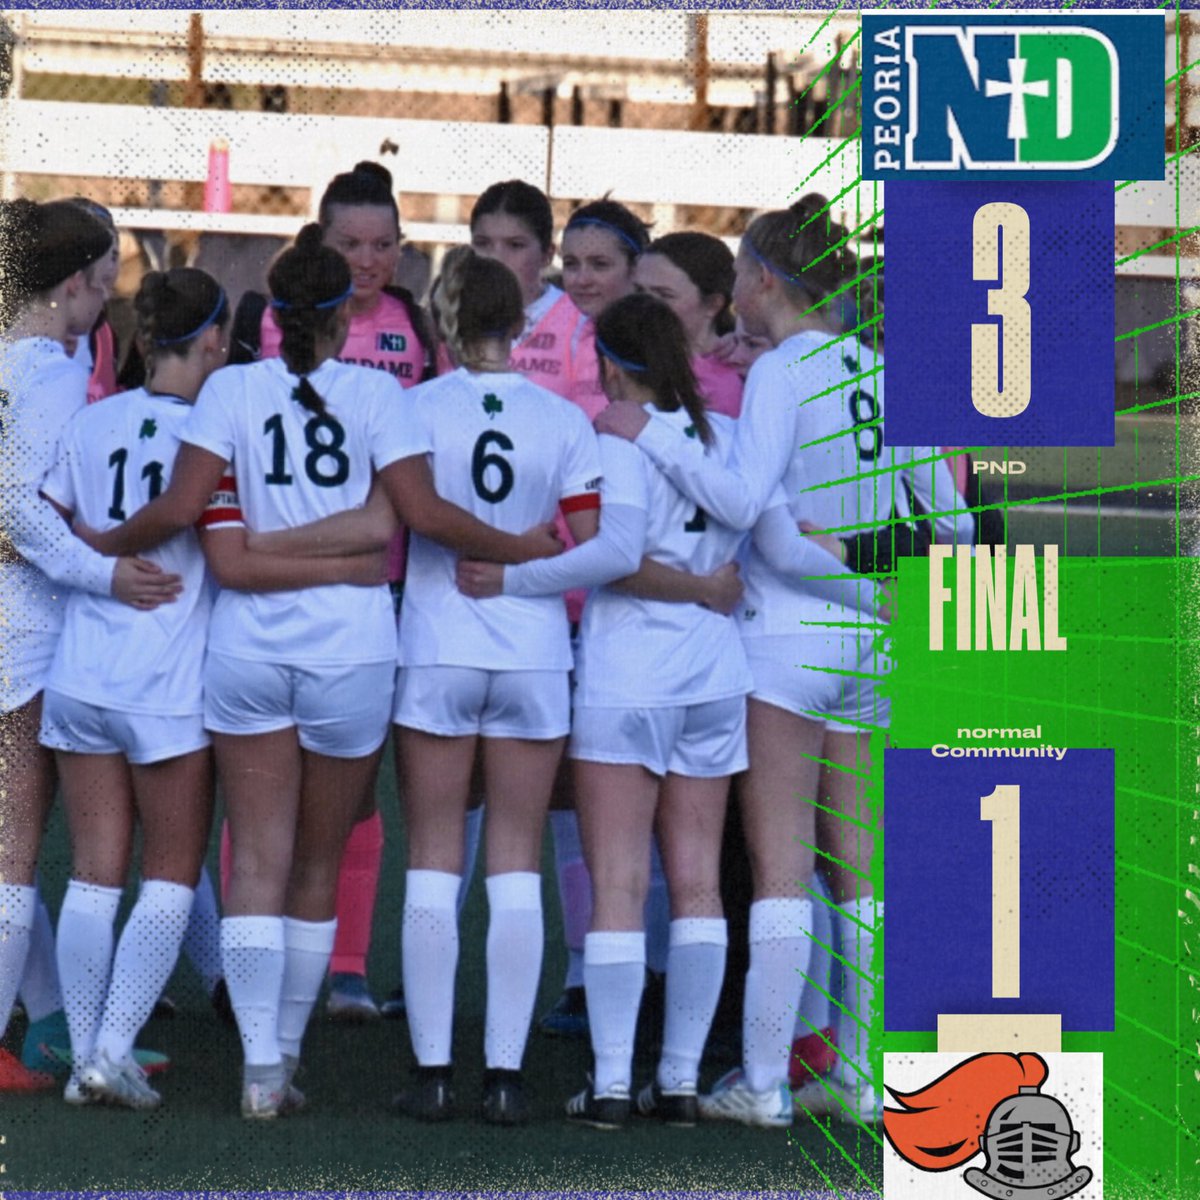 IRISH WIN!!! Nice battle by the girls tonight coming out with the win against a tough Normal Community side! Gotta rest up as we have a few quick turn around with a game tomorrow! ☘️⚽️ #PNDsoccer